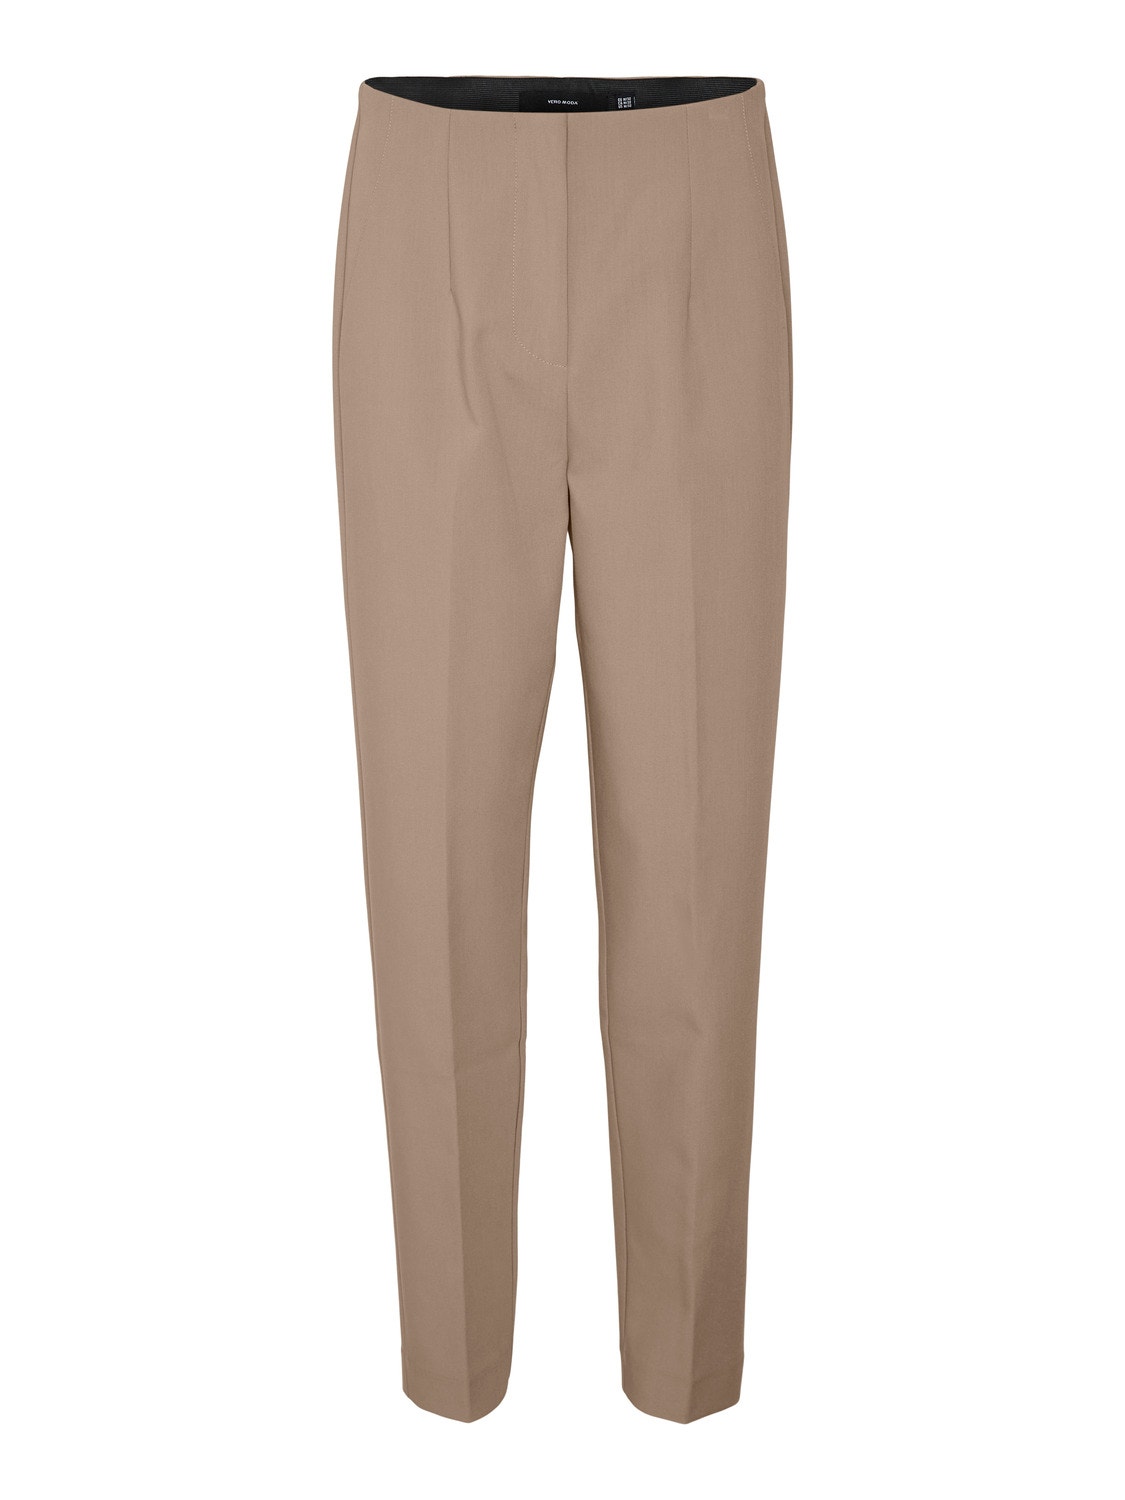 VMSANDY High rise Trousers 40% discount! with | Vero Moda®